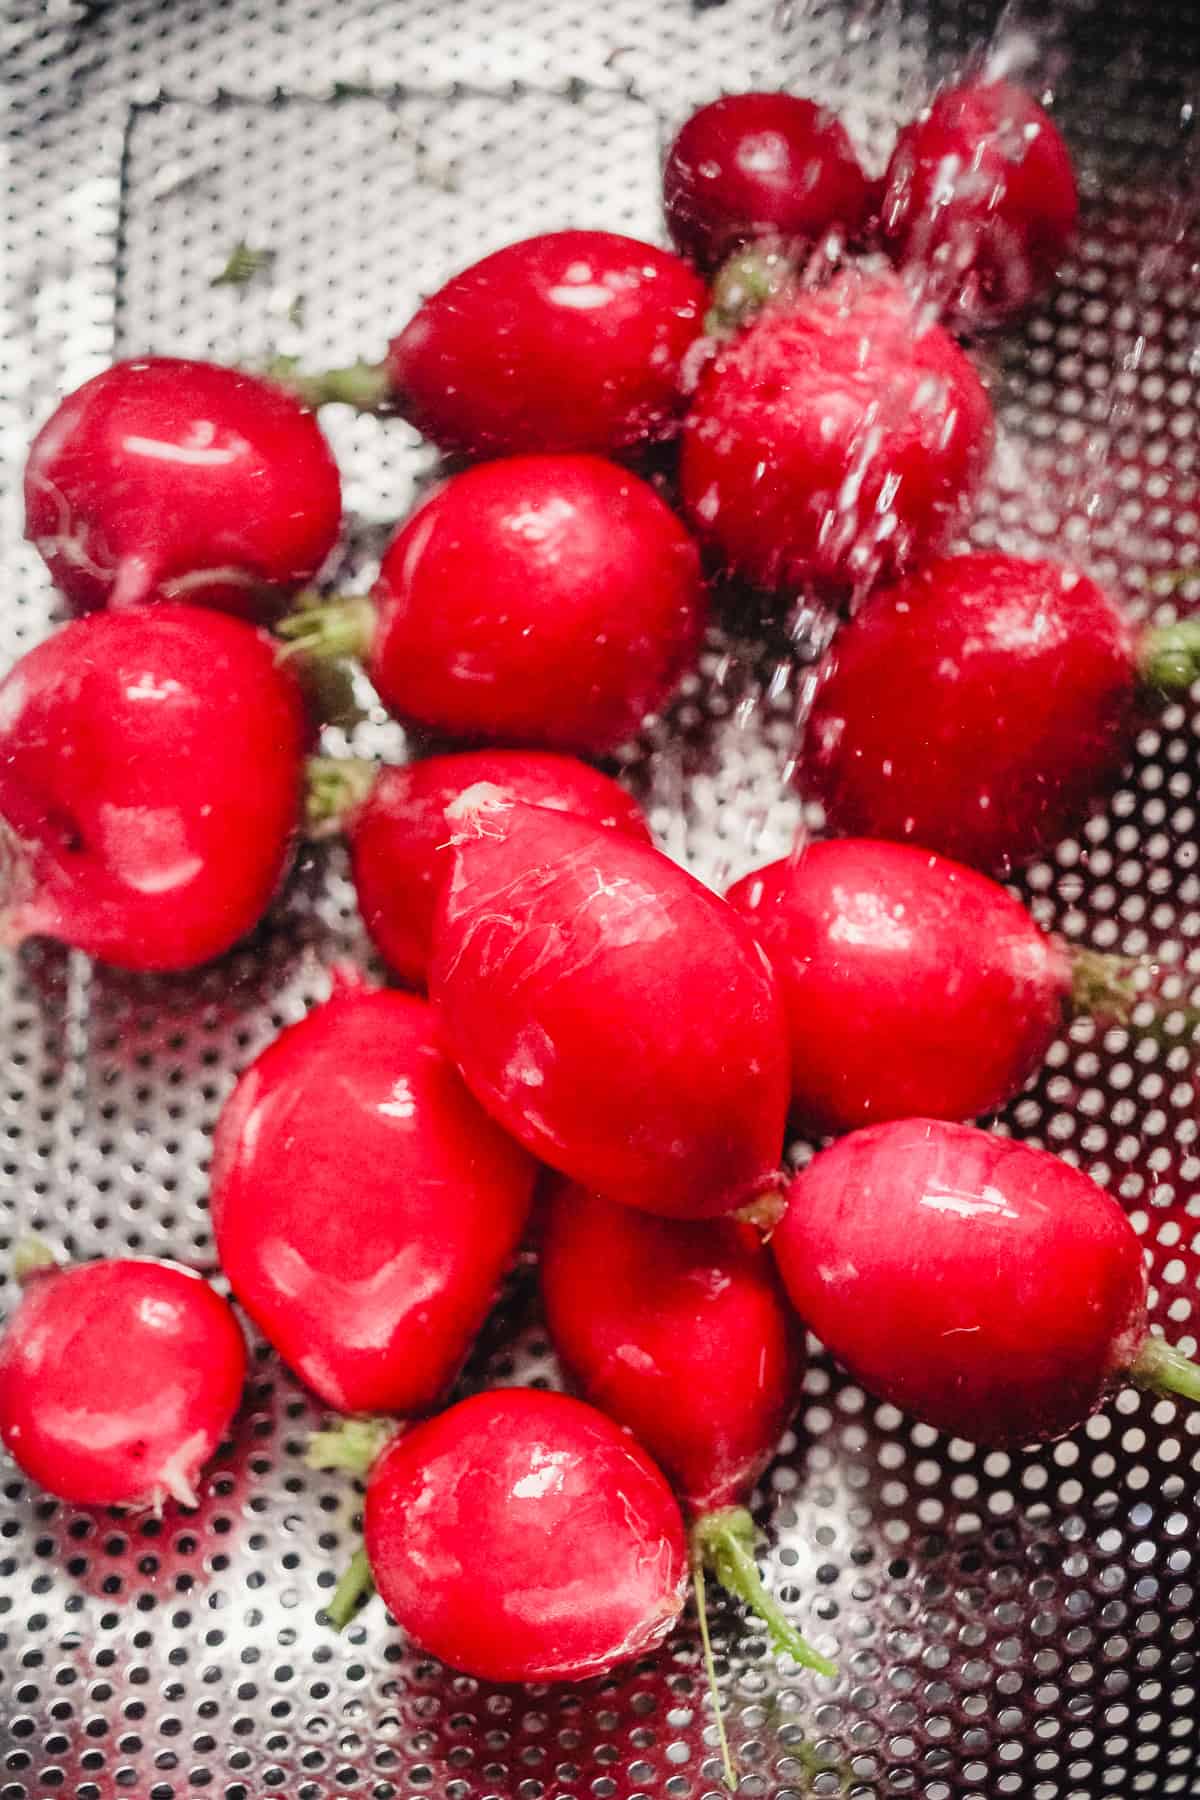 Washing radishes in a colander in the sink.